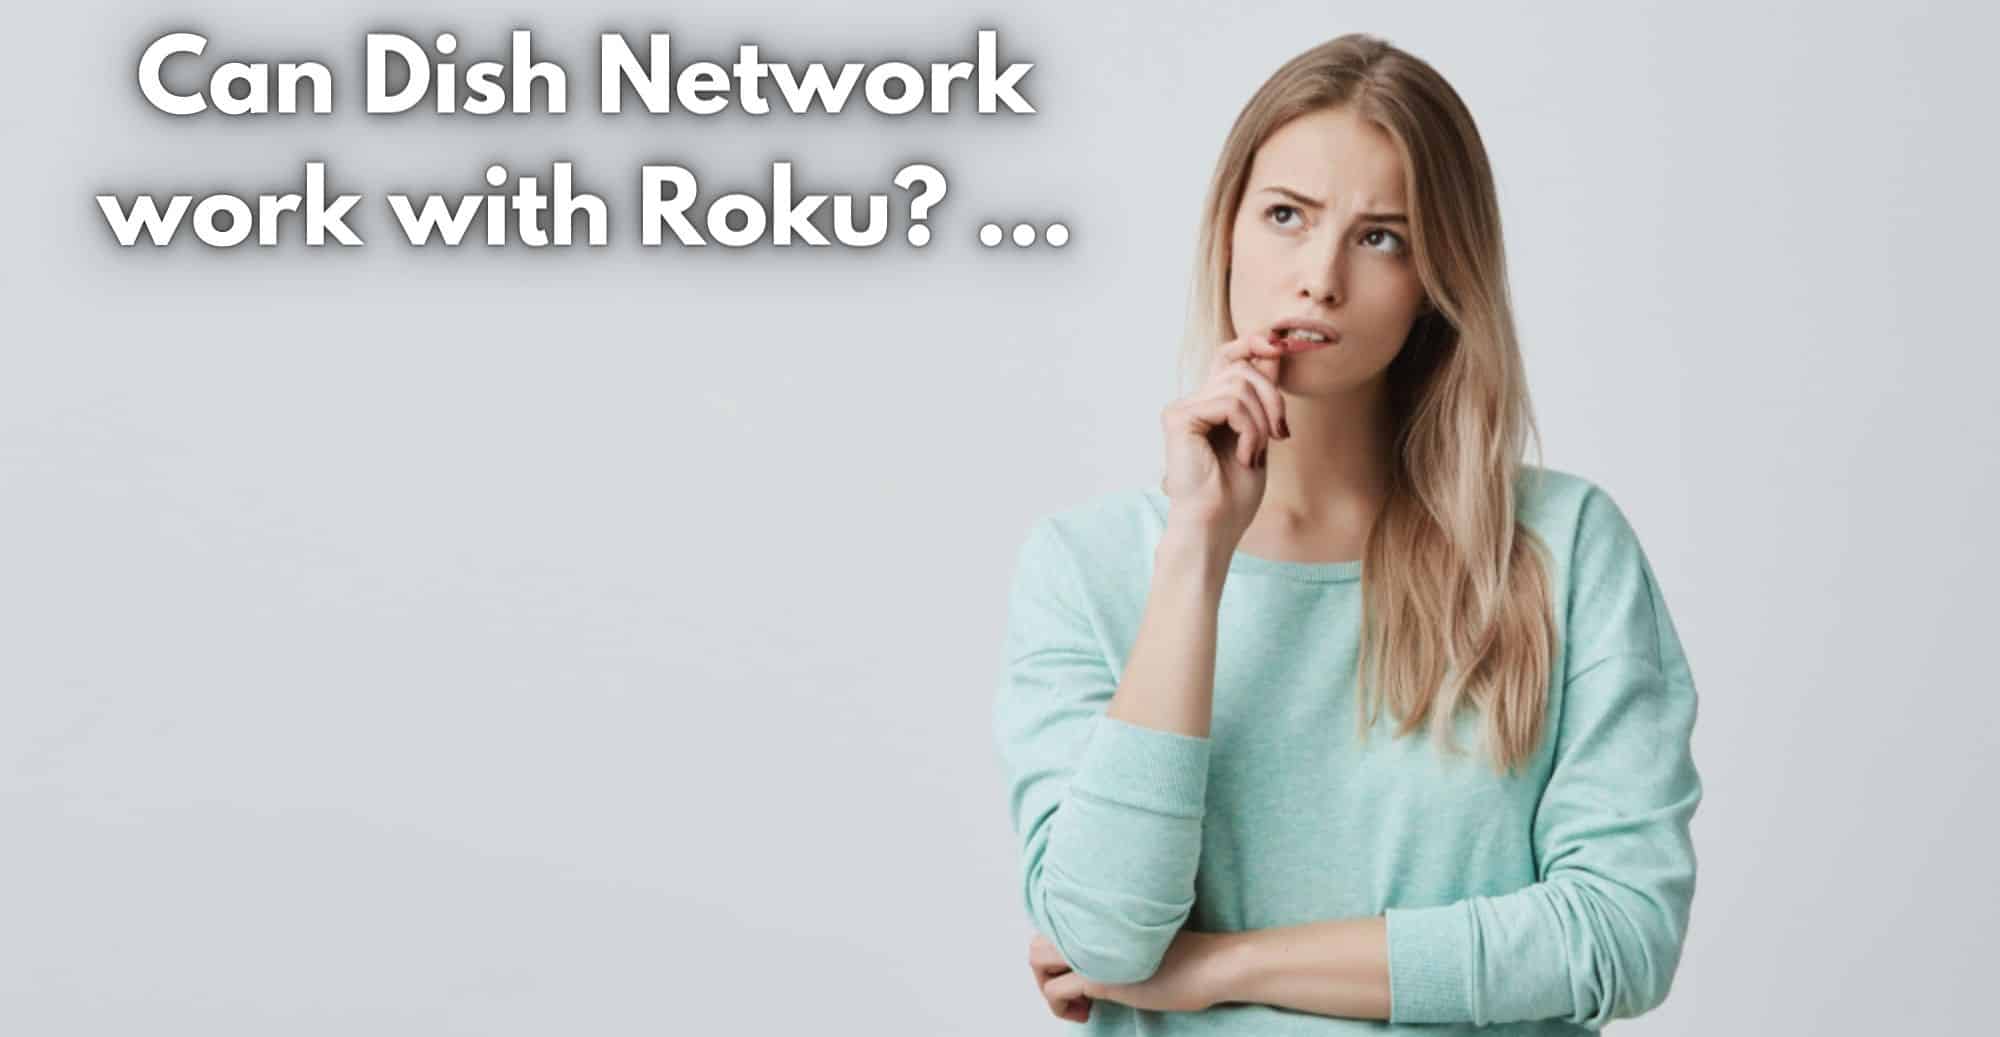 Can Dish Network work with Roku and How Does Roku Work With Dish Network